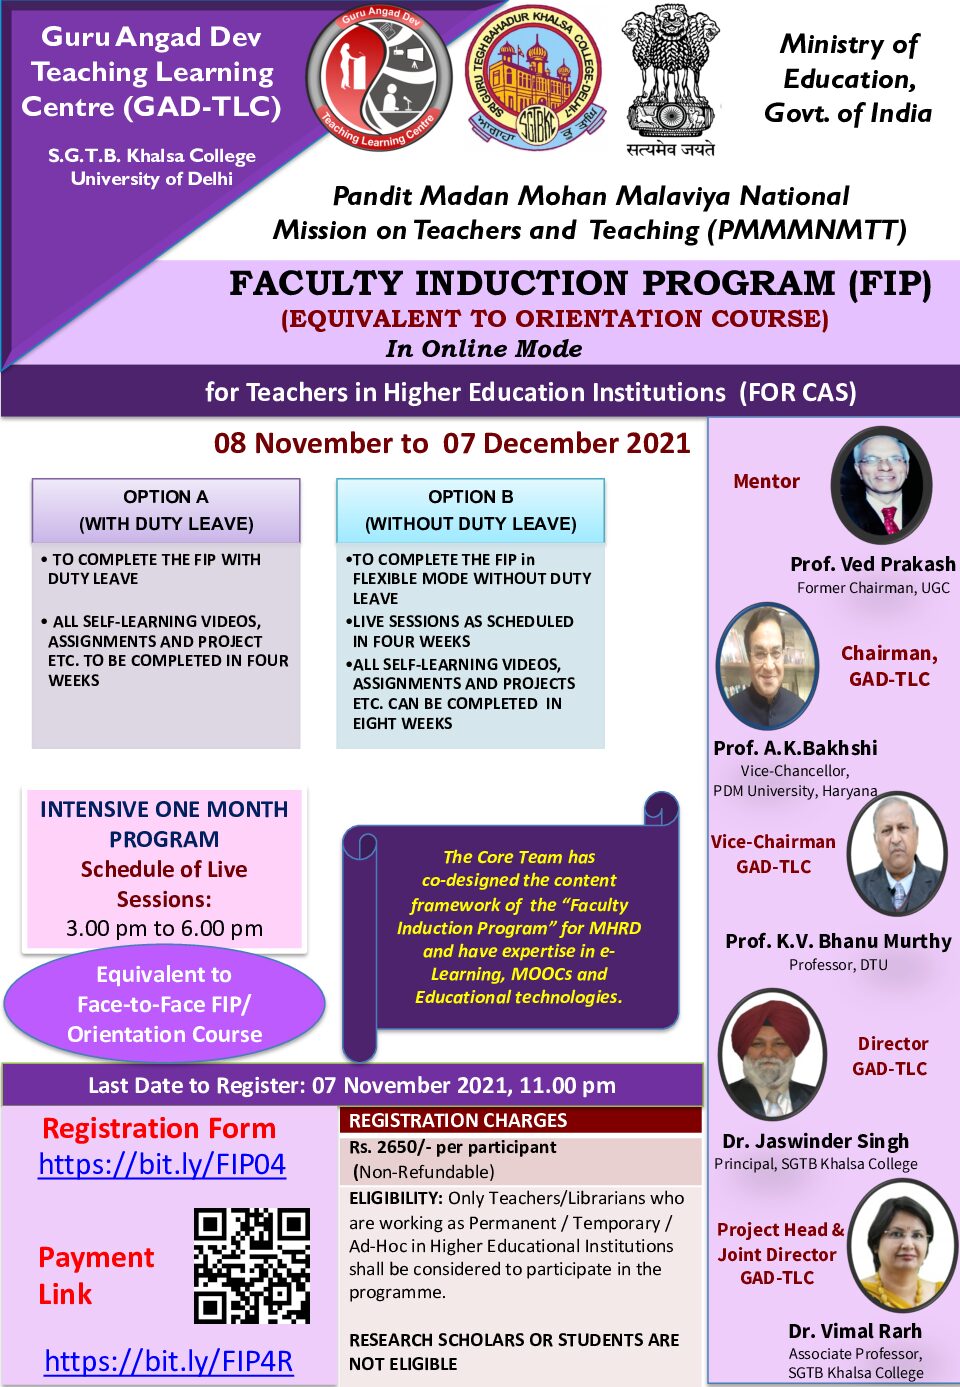 ONE MONTH ONLINE FACULTY INDUCTION/ORIENTATION PROGRAM FOR LAW TEACHERS; REGISTER BY 6TH NOVEMBER 2021 ORGANISED BY: GURU ANGAD DEV TEACHING LEARNING CENTRE GAD-TLC, PMMMNMTT, MINISTRY OF EDUCATION, GOVT. OF INDIA